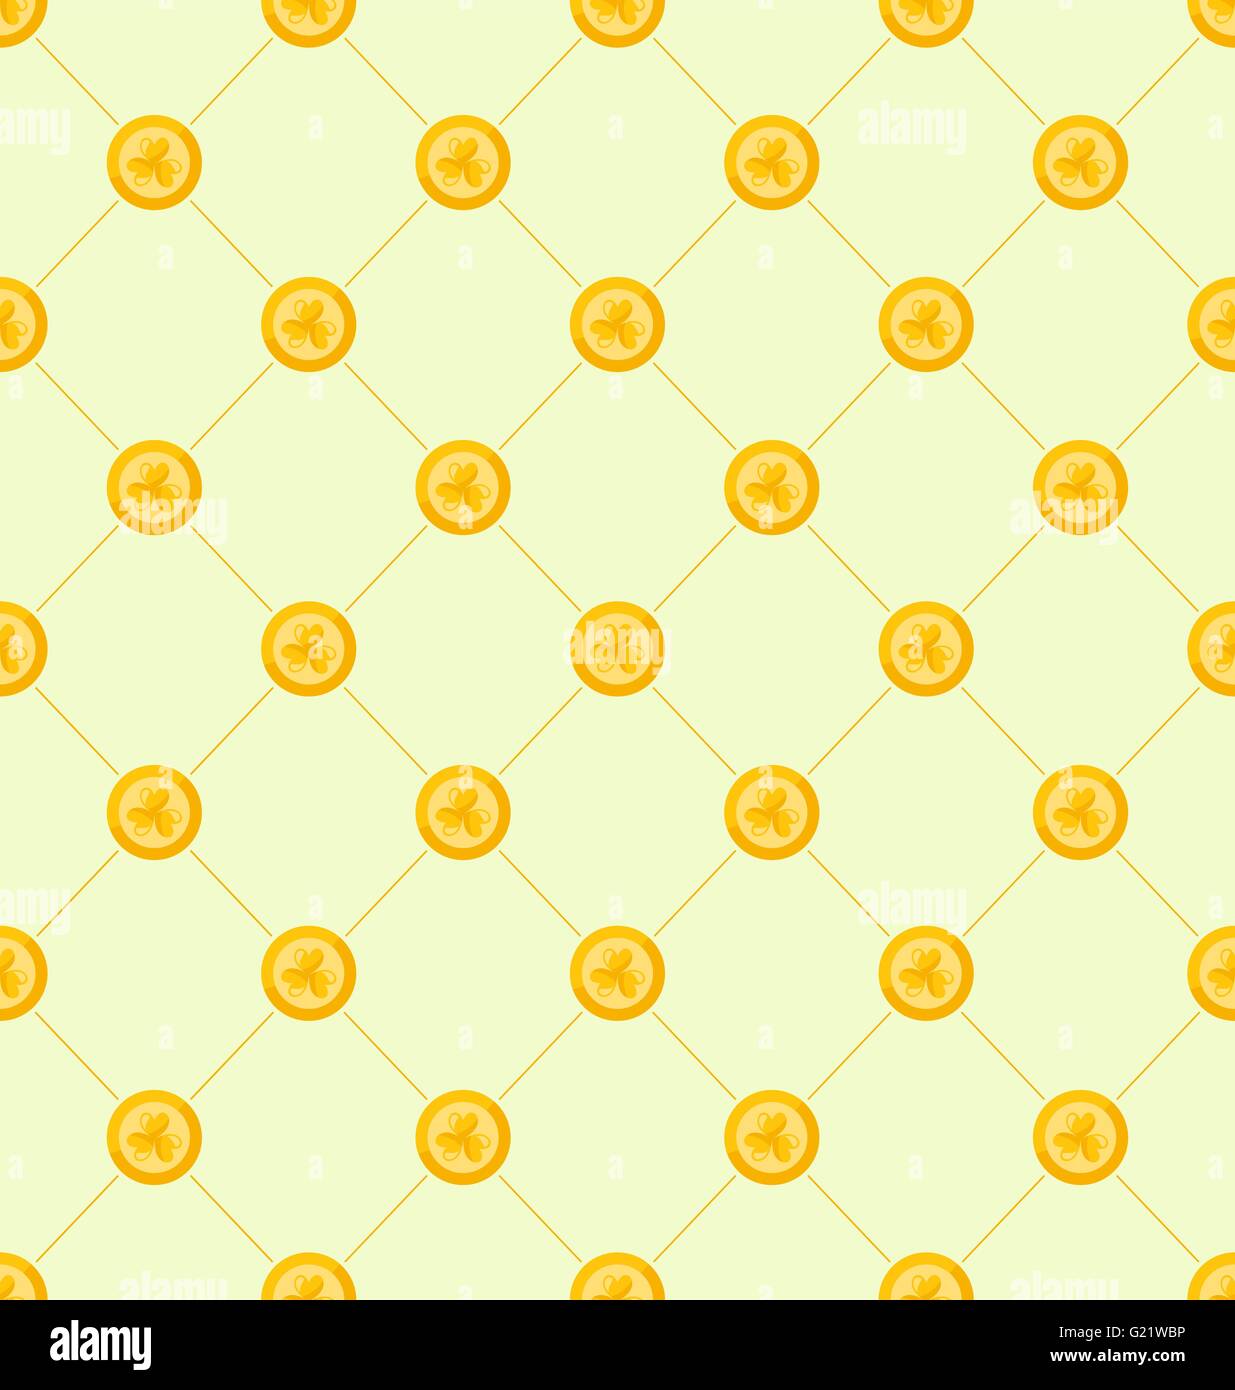 Seamless Simple Pattern with Golden Coins for St. Patricks Day Stock Vector